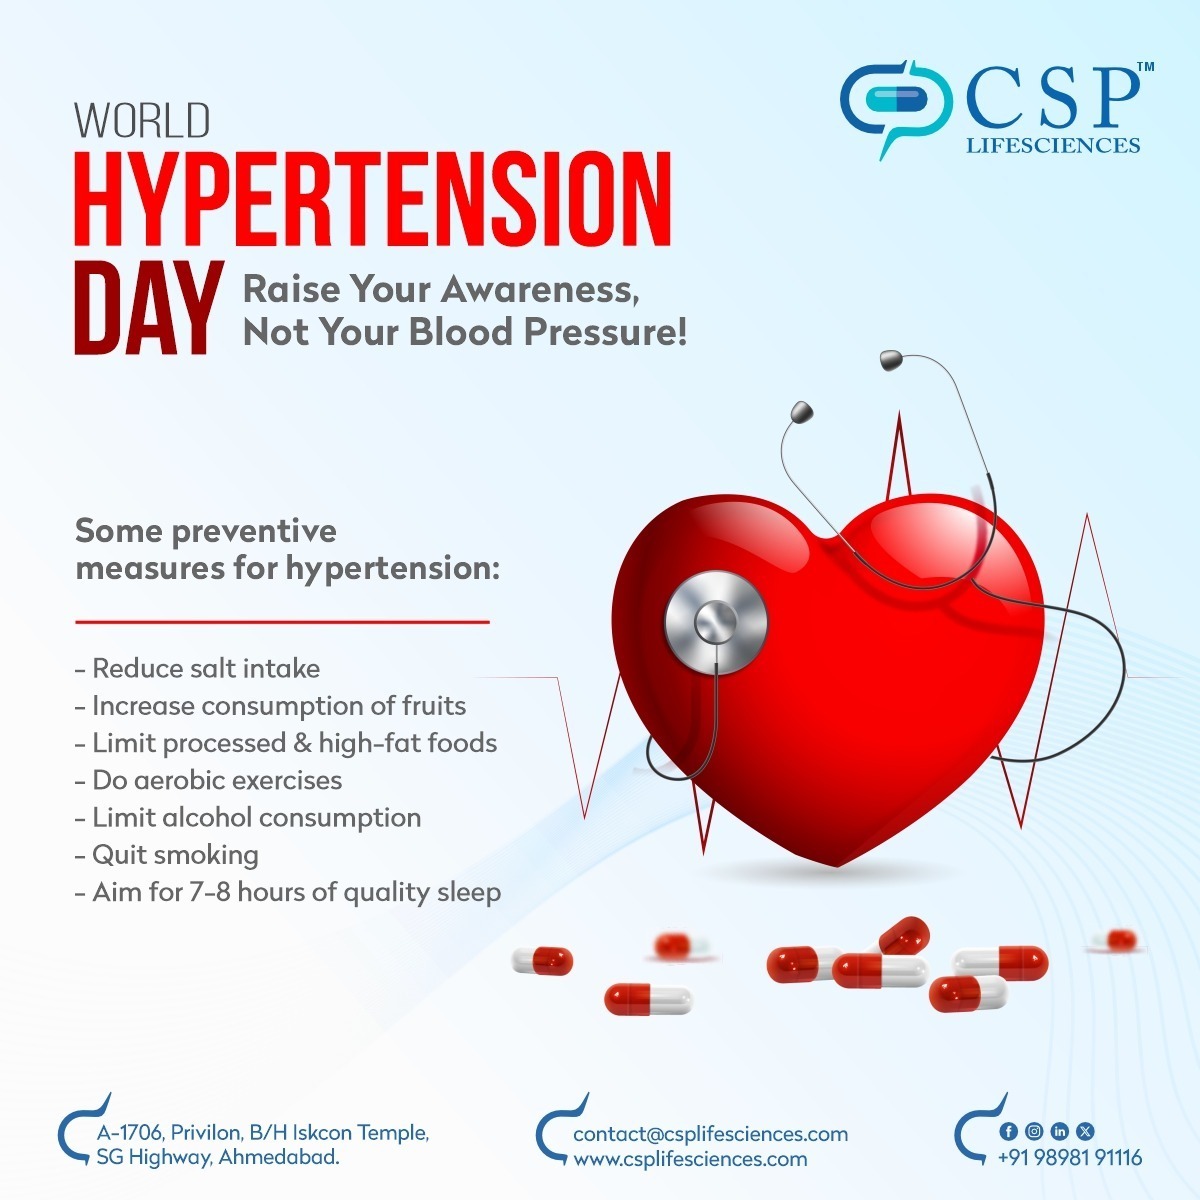 Don't let your blood pressure rise, let awareness soar! 🚀 
On World Hypertension Day, let's pledge to prioritize our health with these simple steps. From slashing salt to savoring fruits, each choice counts.  

Say yes to wellness, not stress! 💪
 
#WorldHypertensionDay